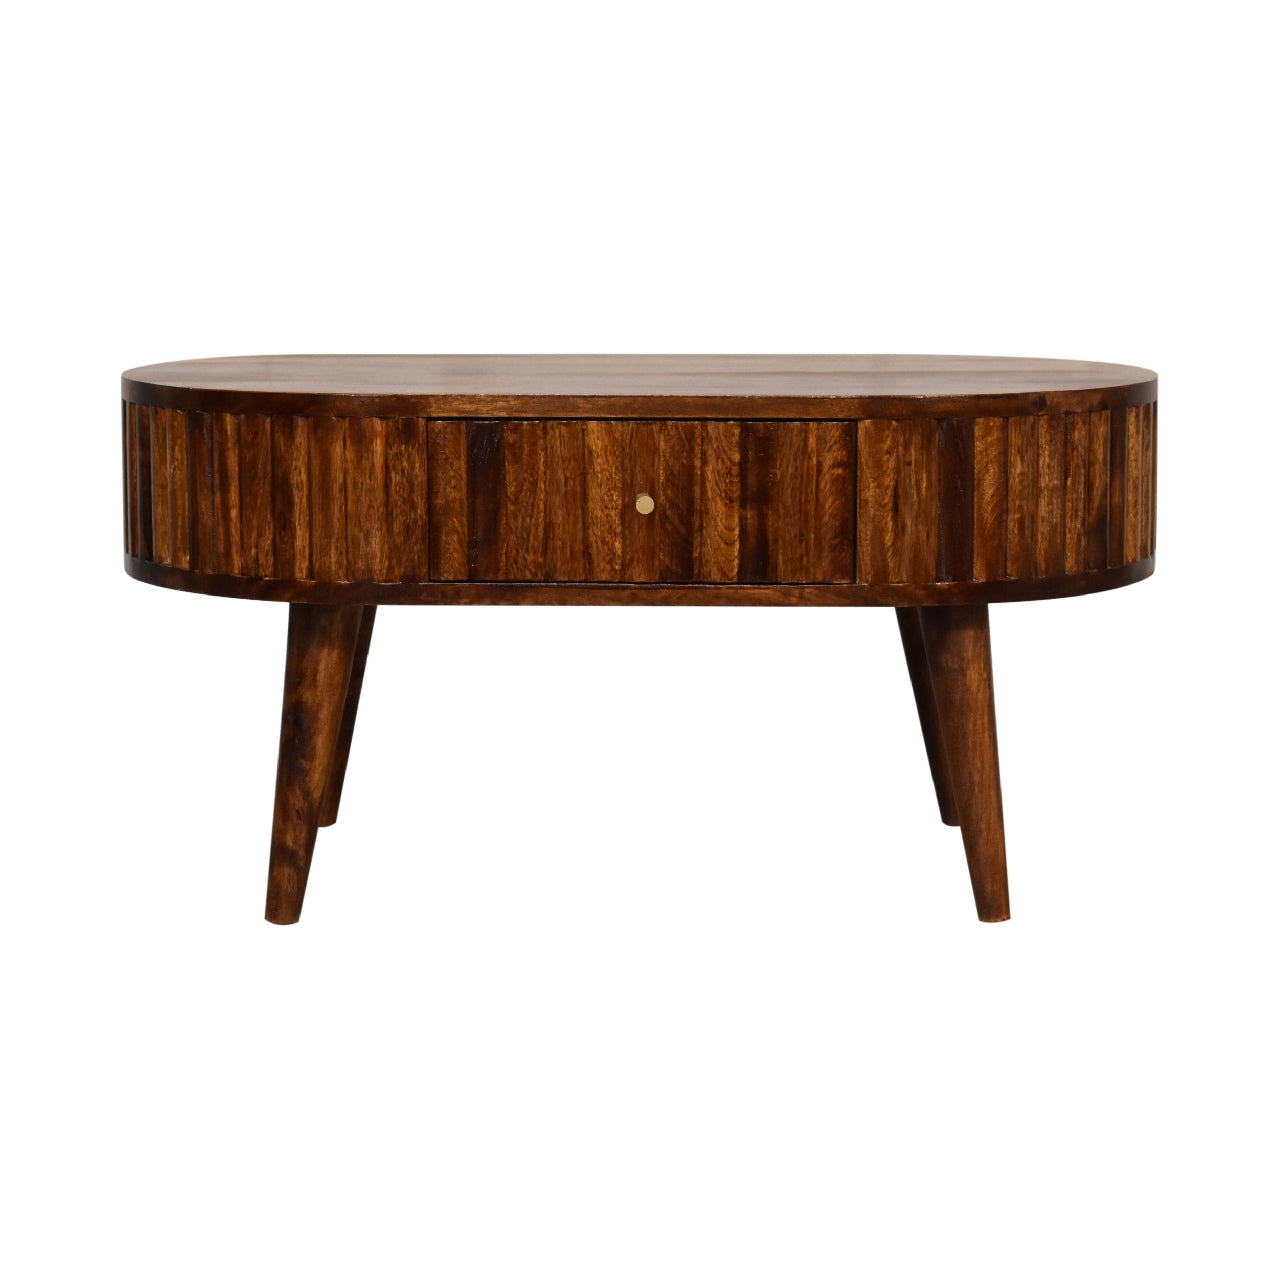 View Stripe Chestnut Coffee Table information